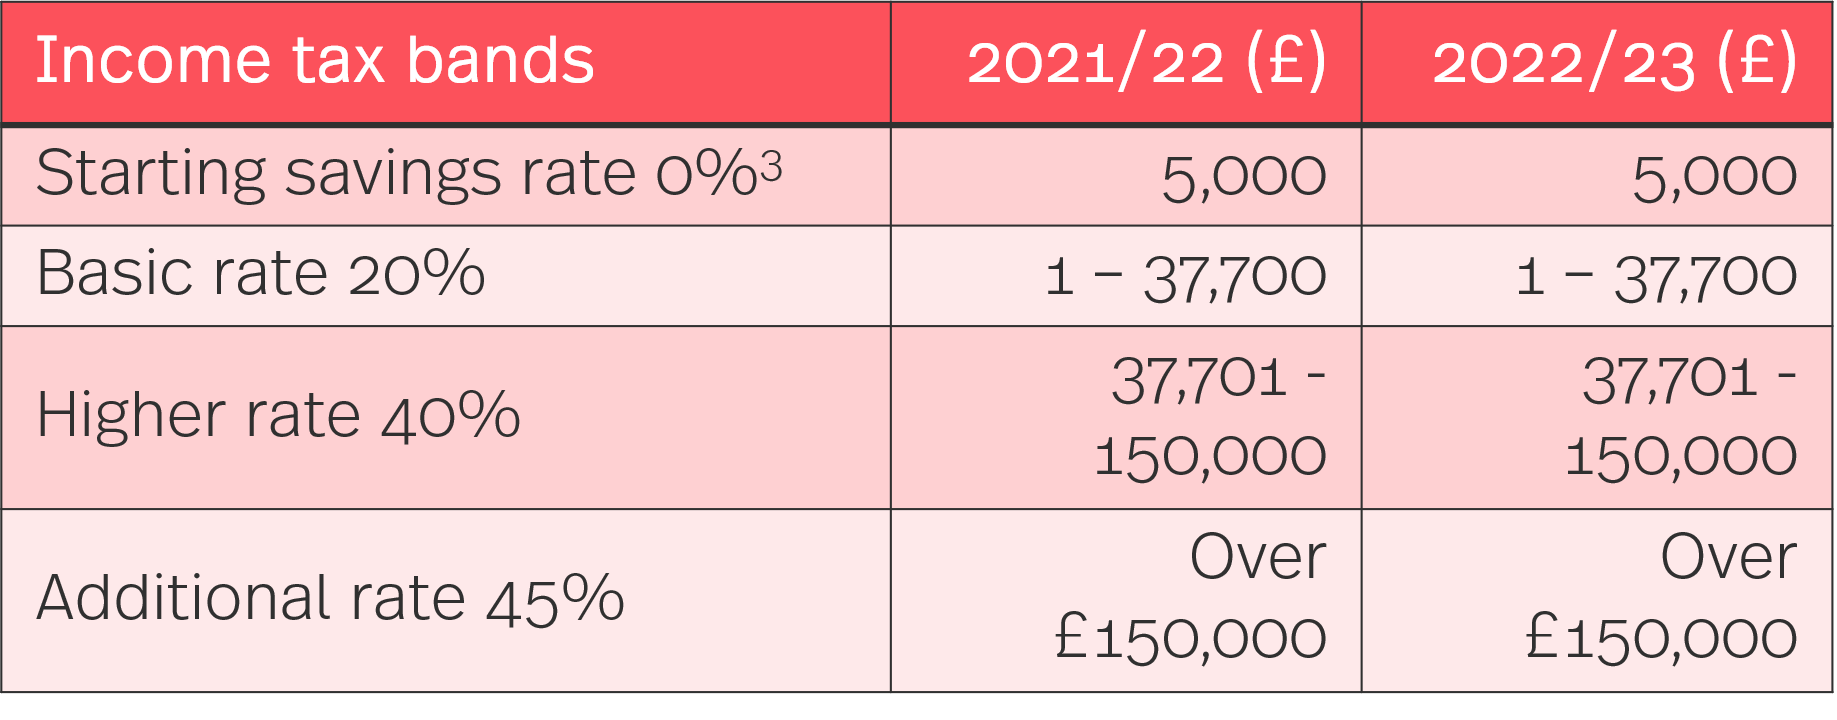 HMRC tax rates and allowances for 2022/23 Simmons & Simmons